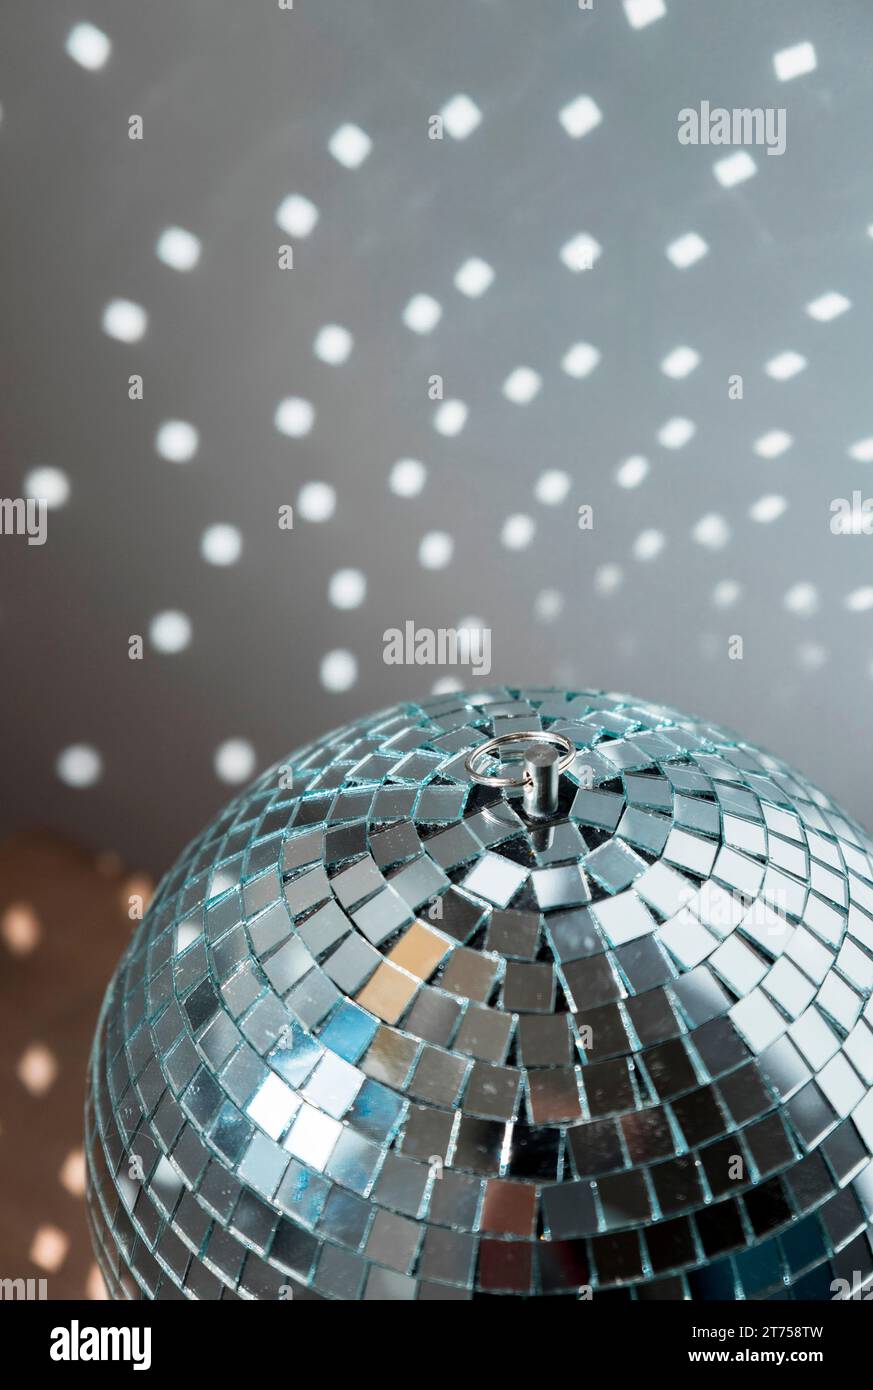 Big disco ball with bright party lights Stock Photo